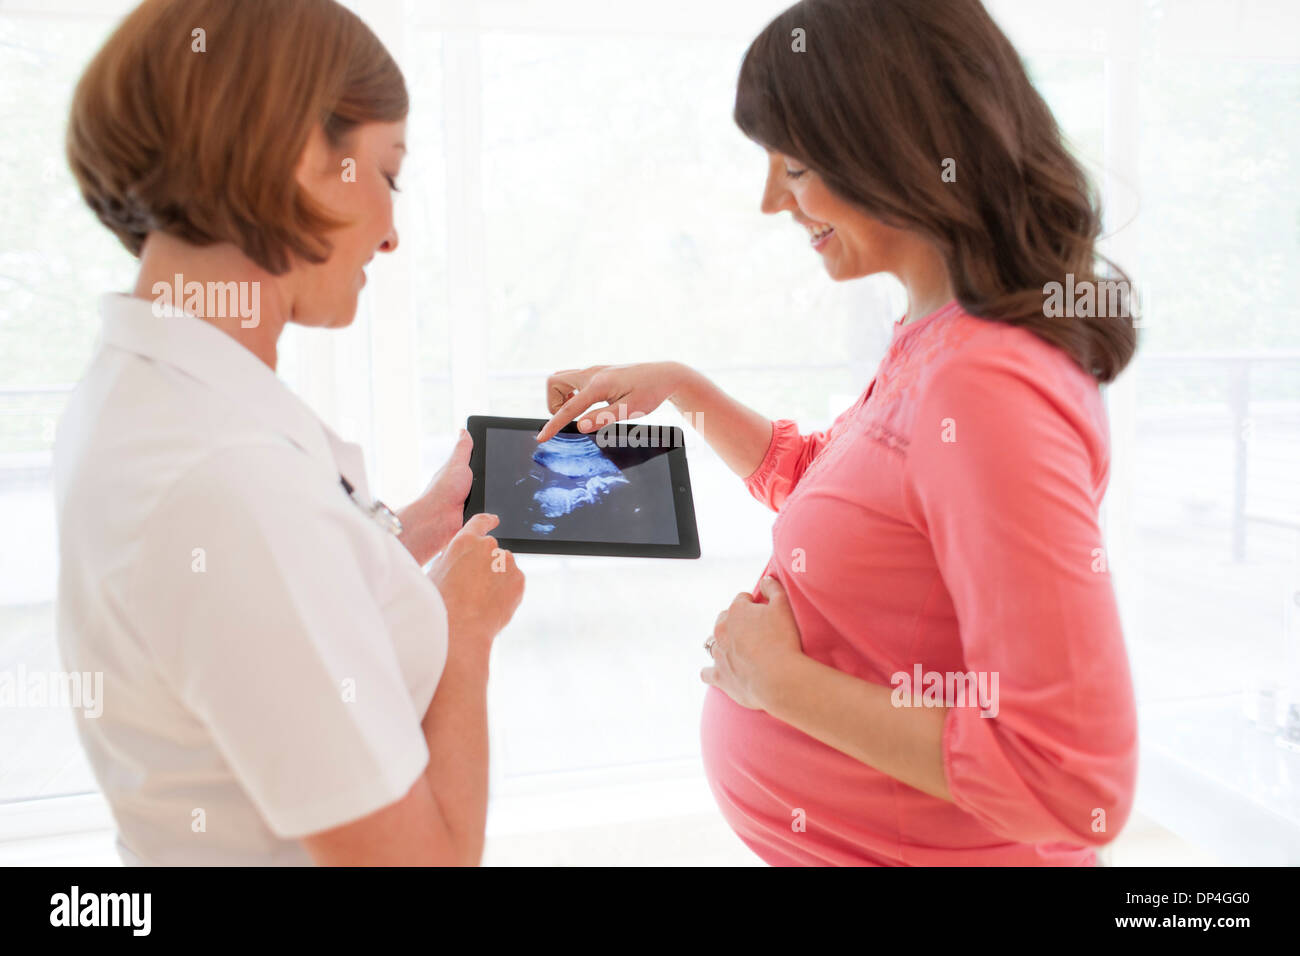 Pregnant woman with baby scan Stock Photo